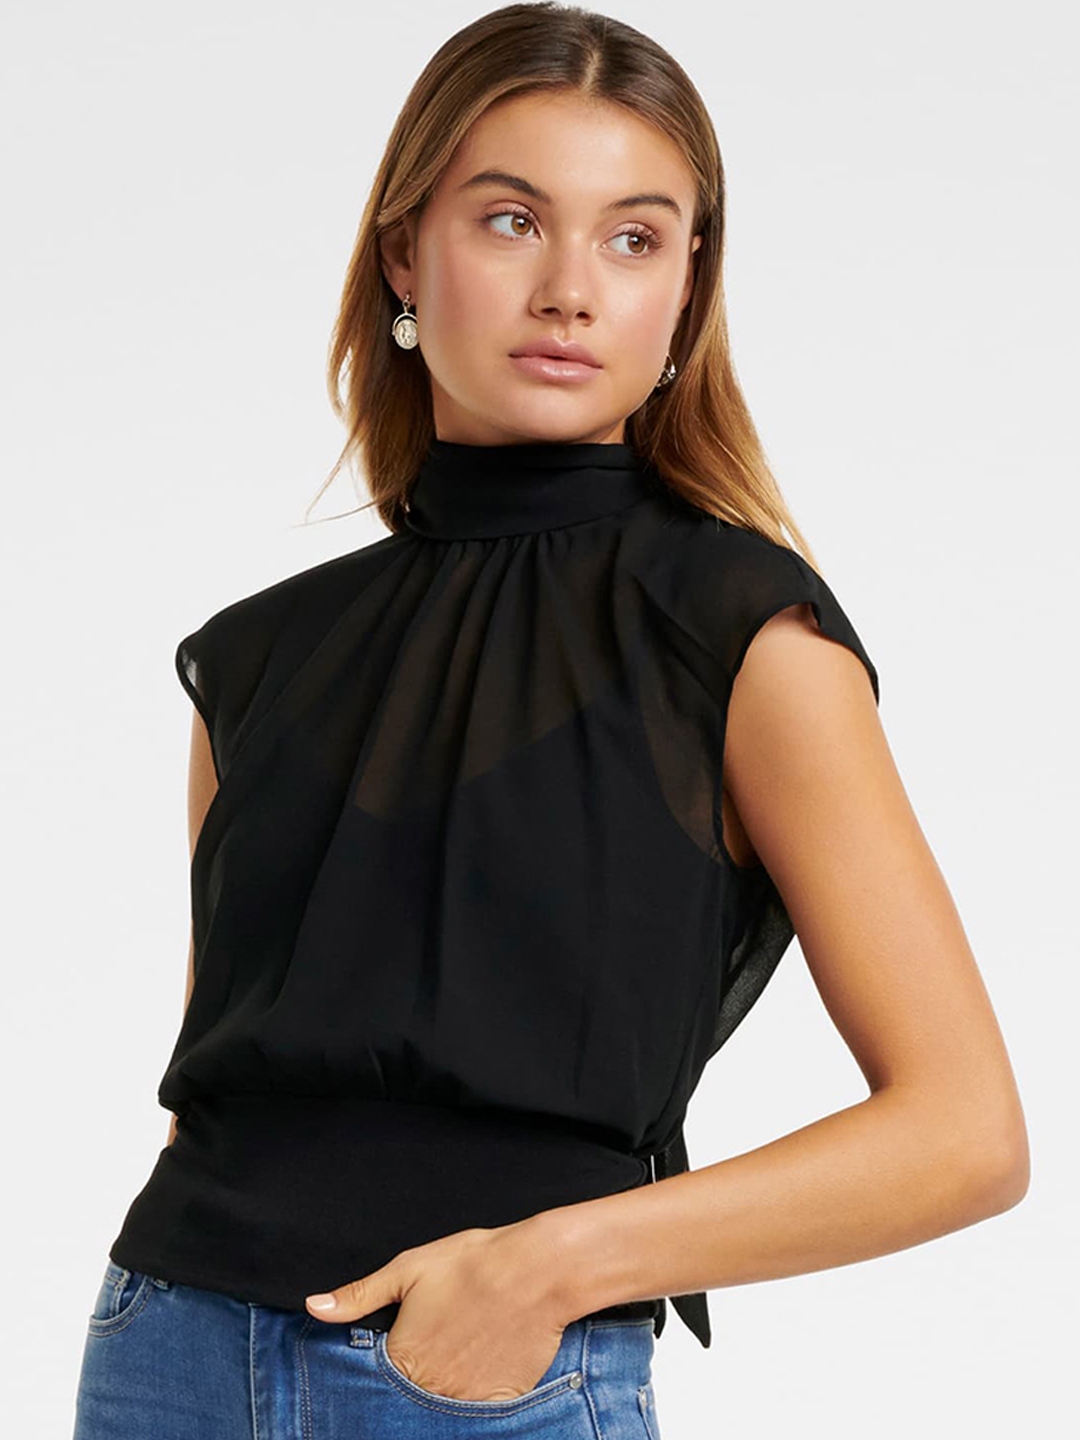 Buy Forever New Women Black Solid Top - Tops for Women 10721794 | Myntra